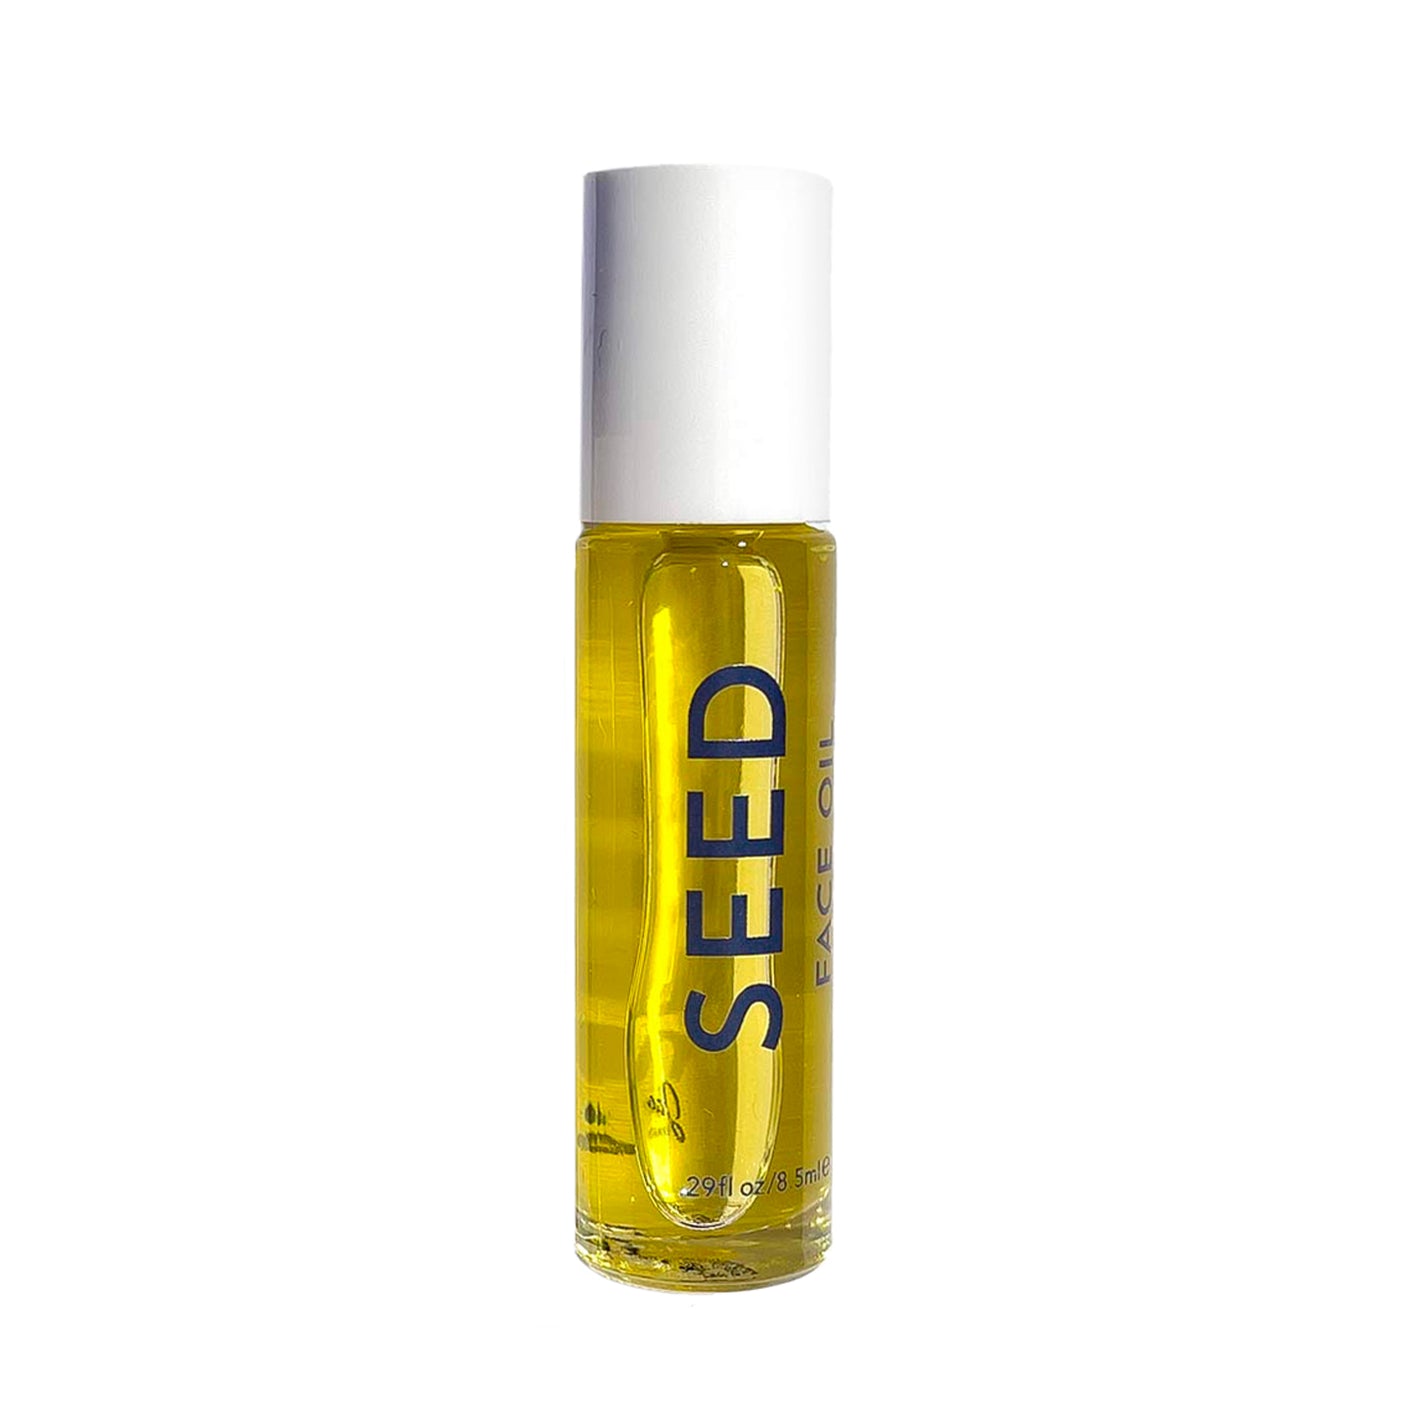 Jao Seed Face Oil